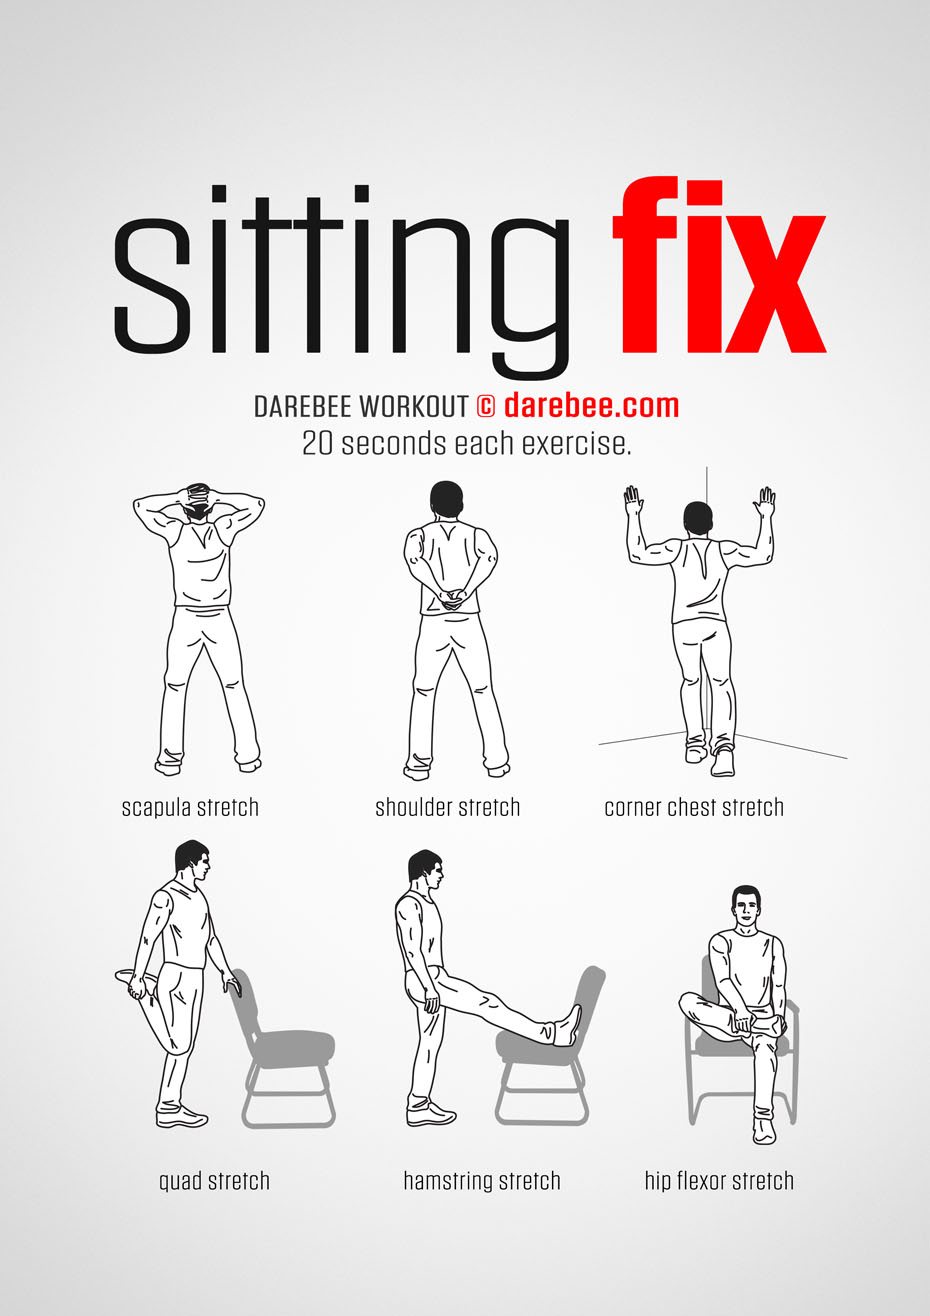 https://darebee.com/images/workouts/sitting-fix-workout.jpg